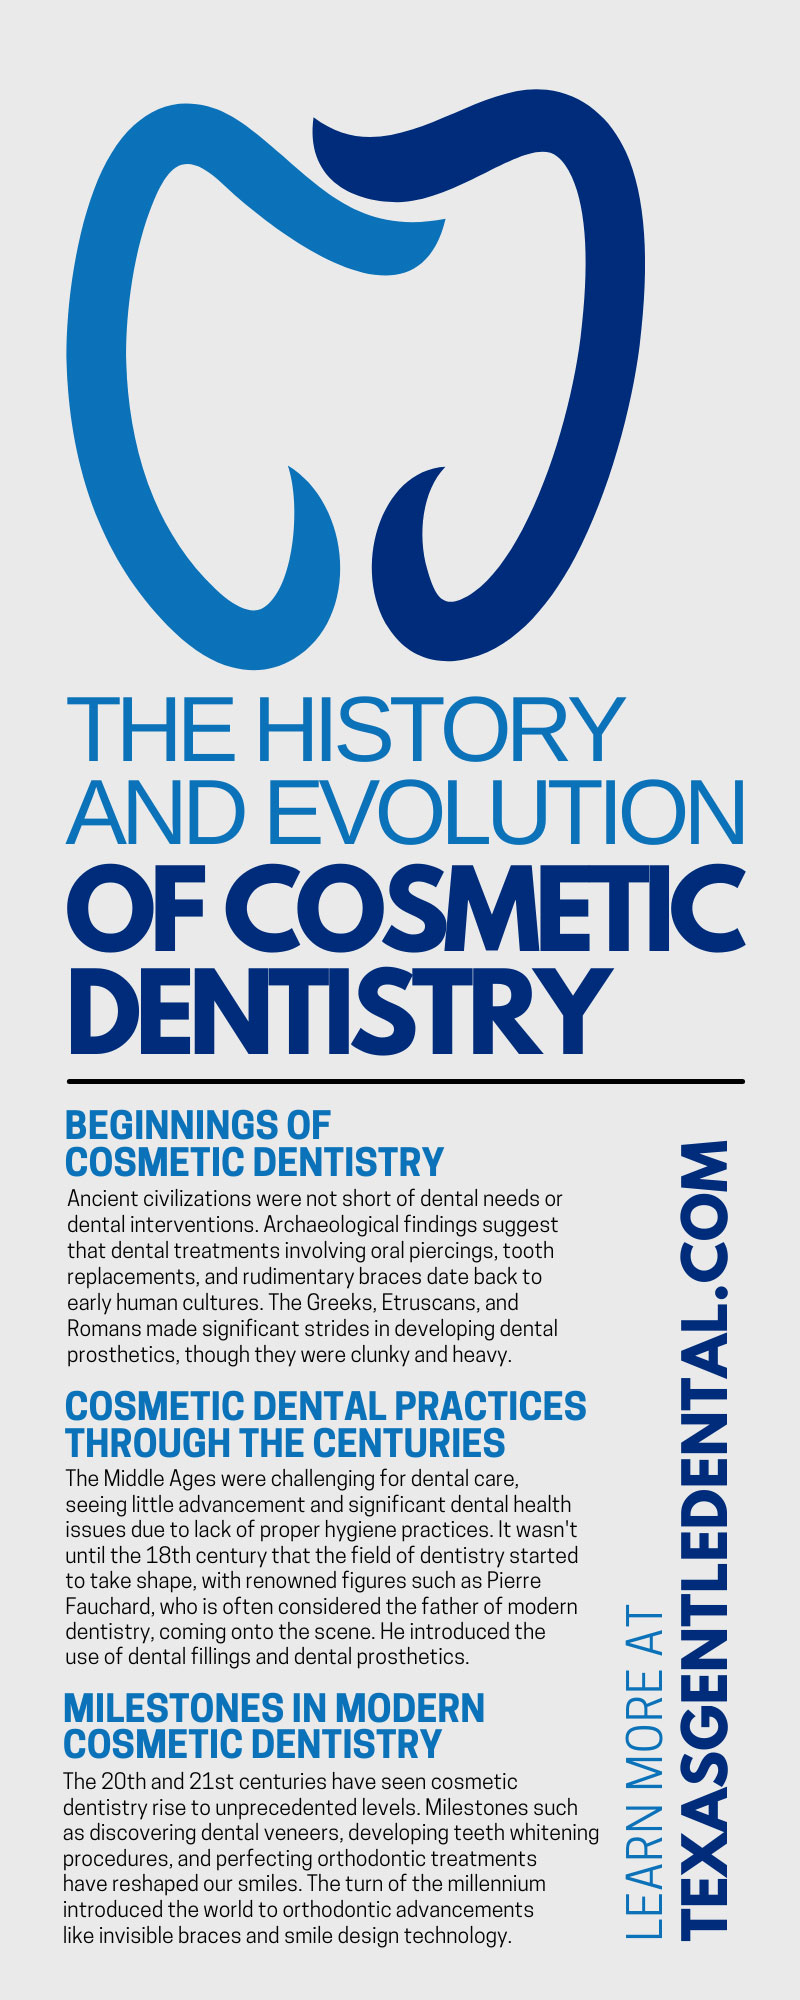 The History and Evolution of Cosmetic Dentistry